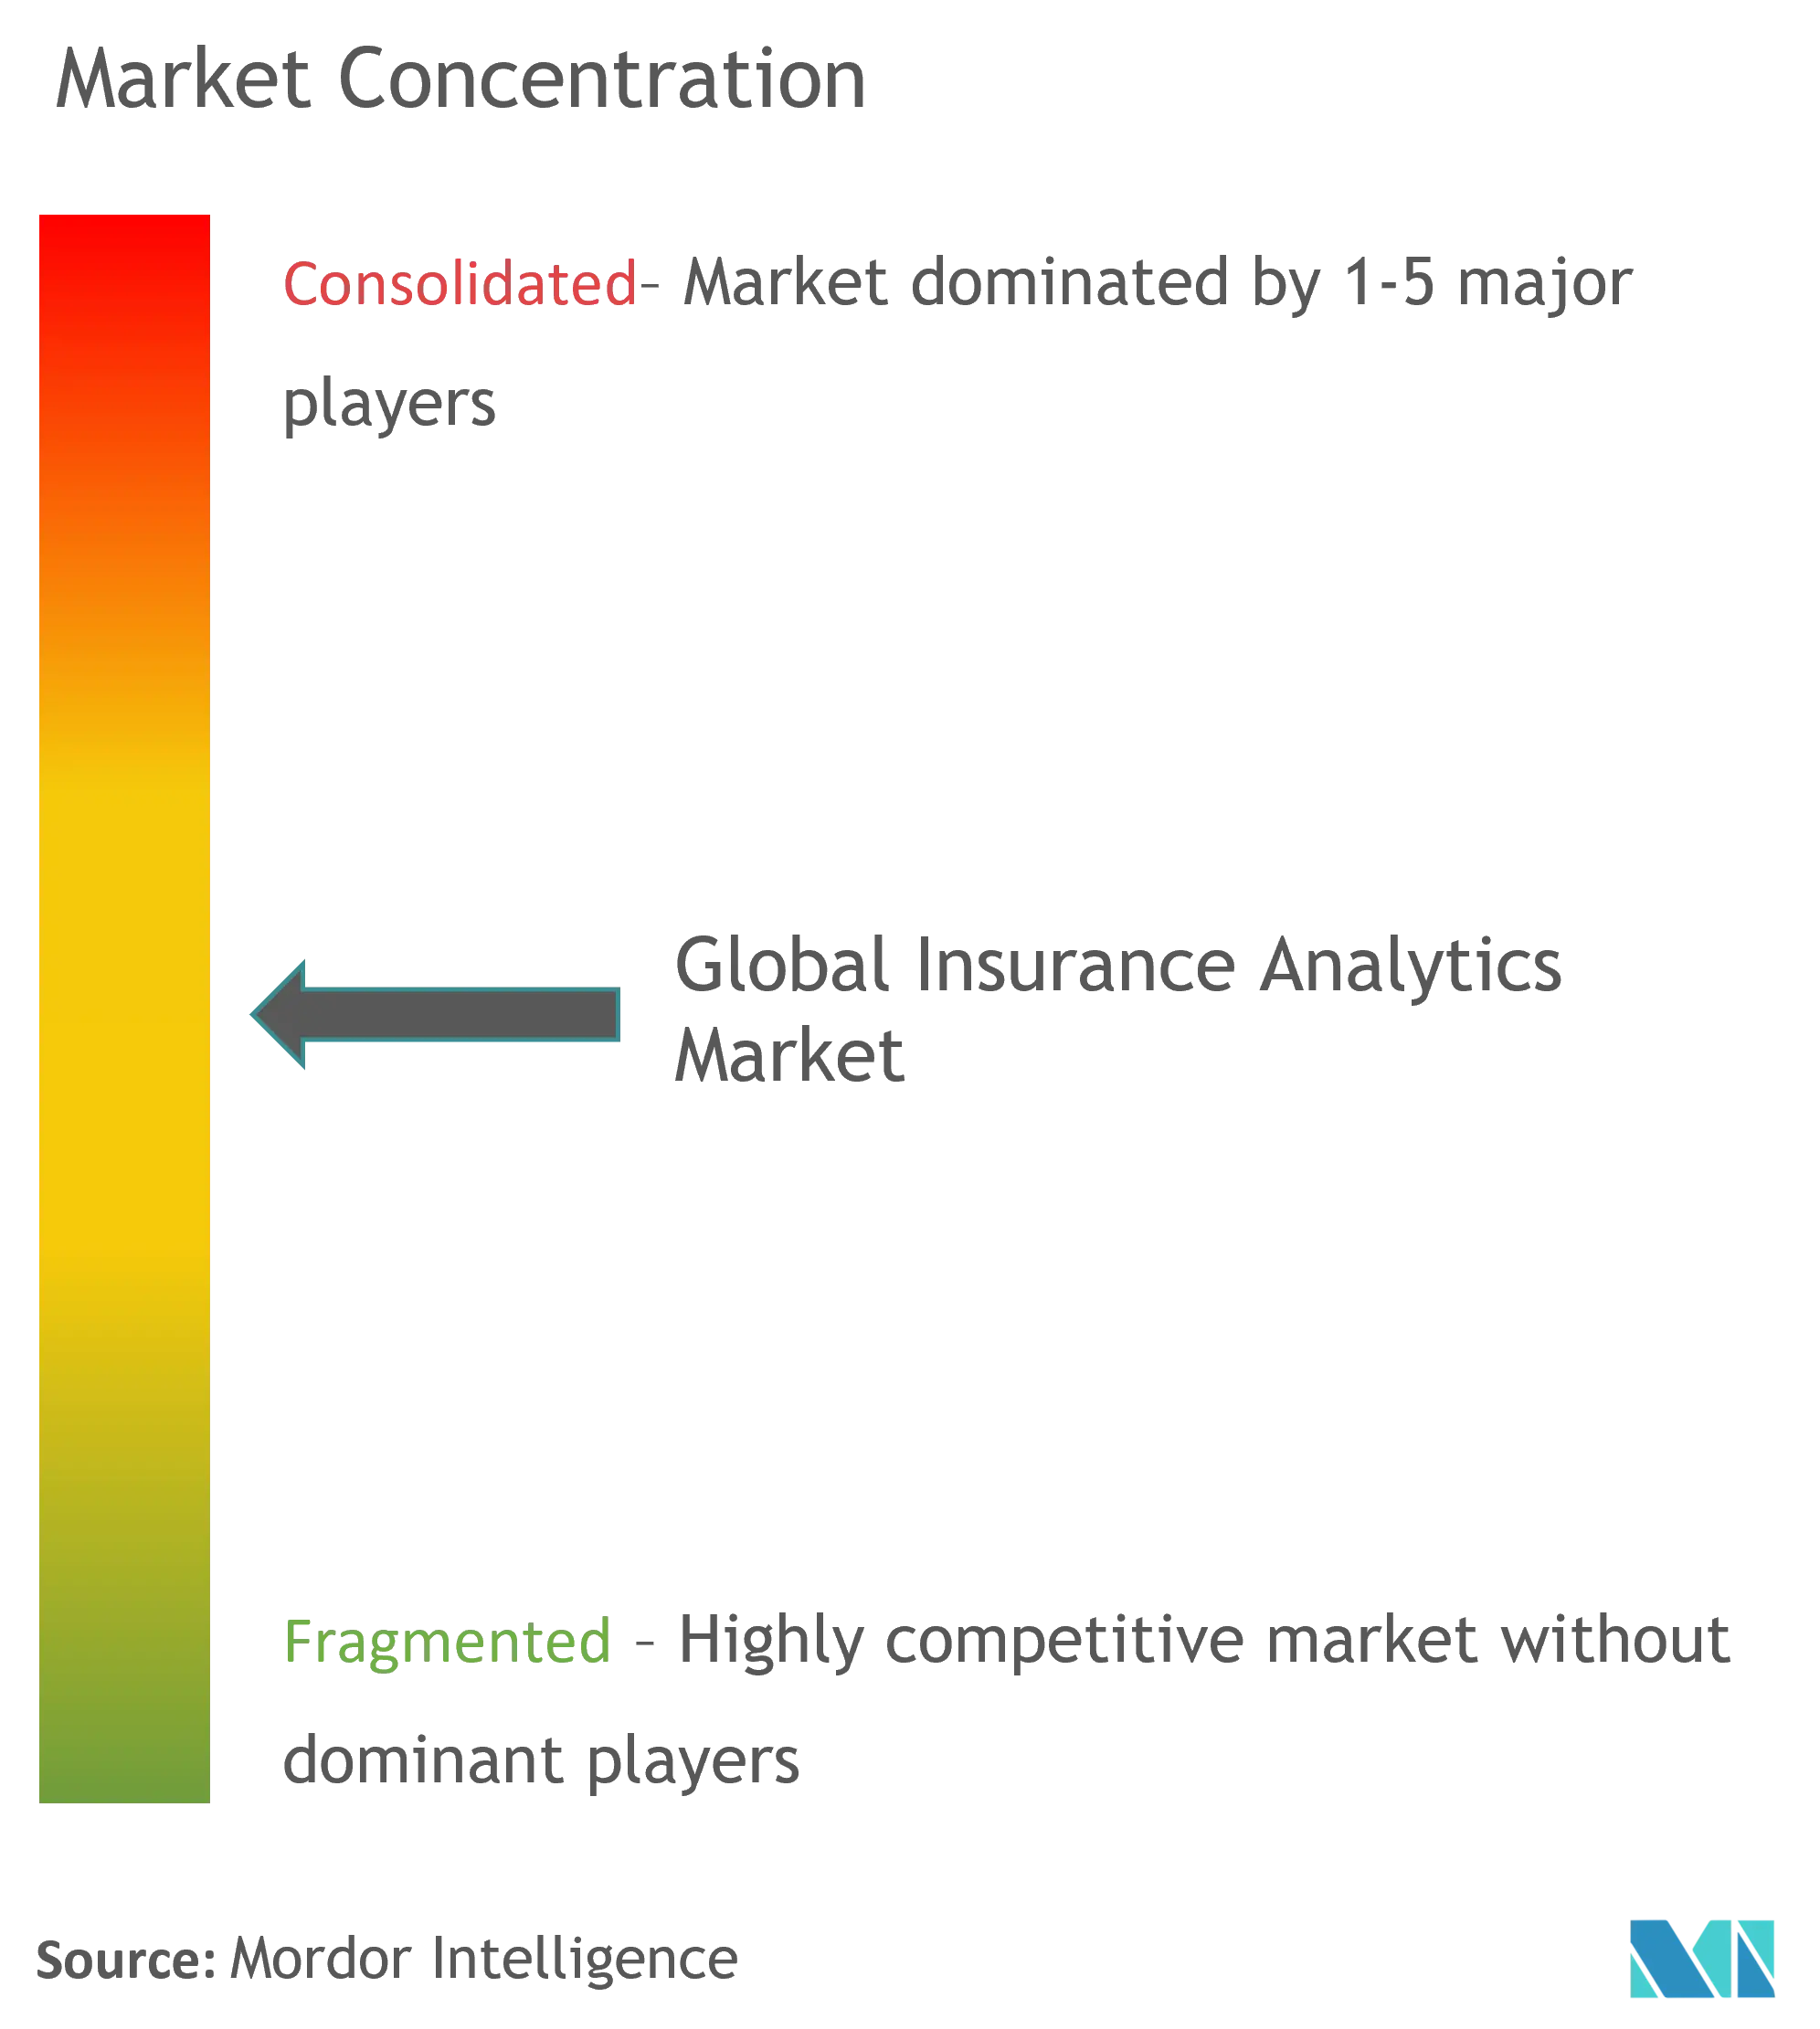 Insurance Analytics Market Concentration